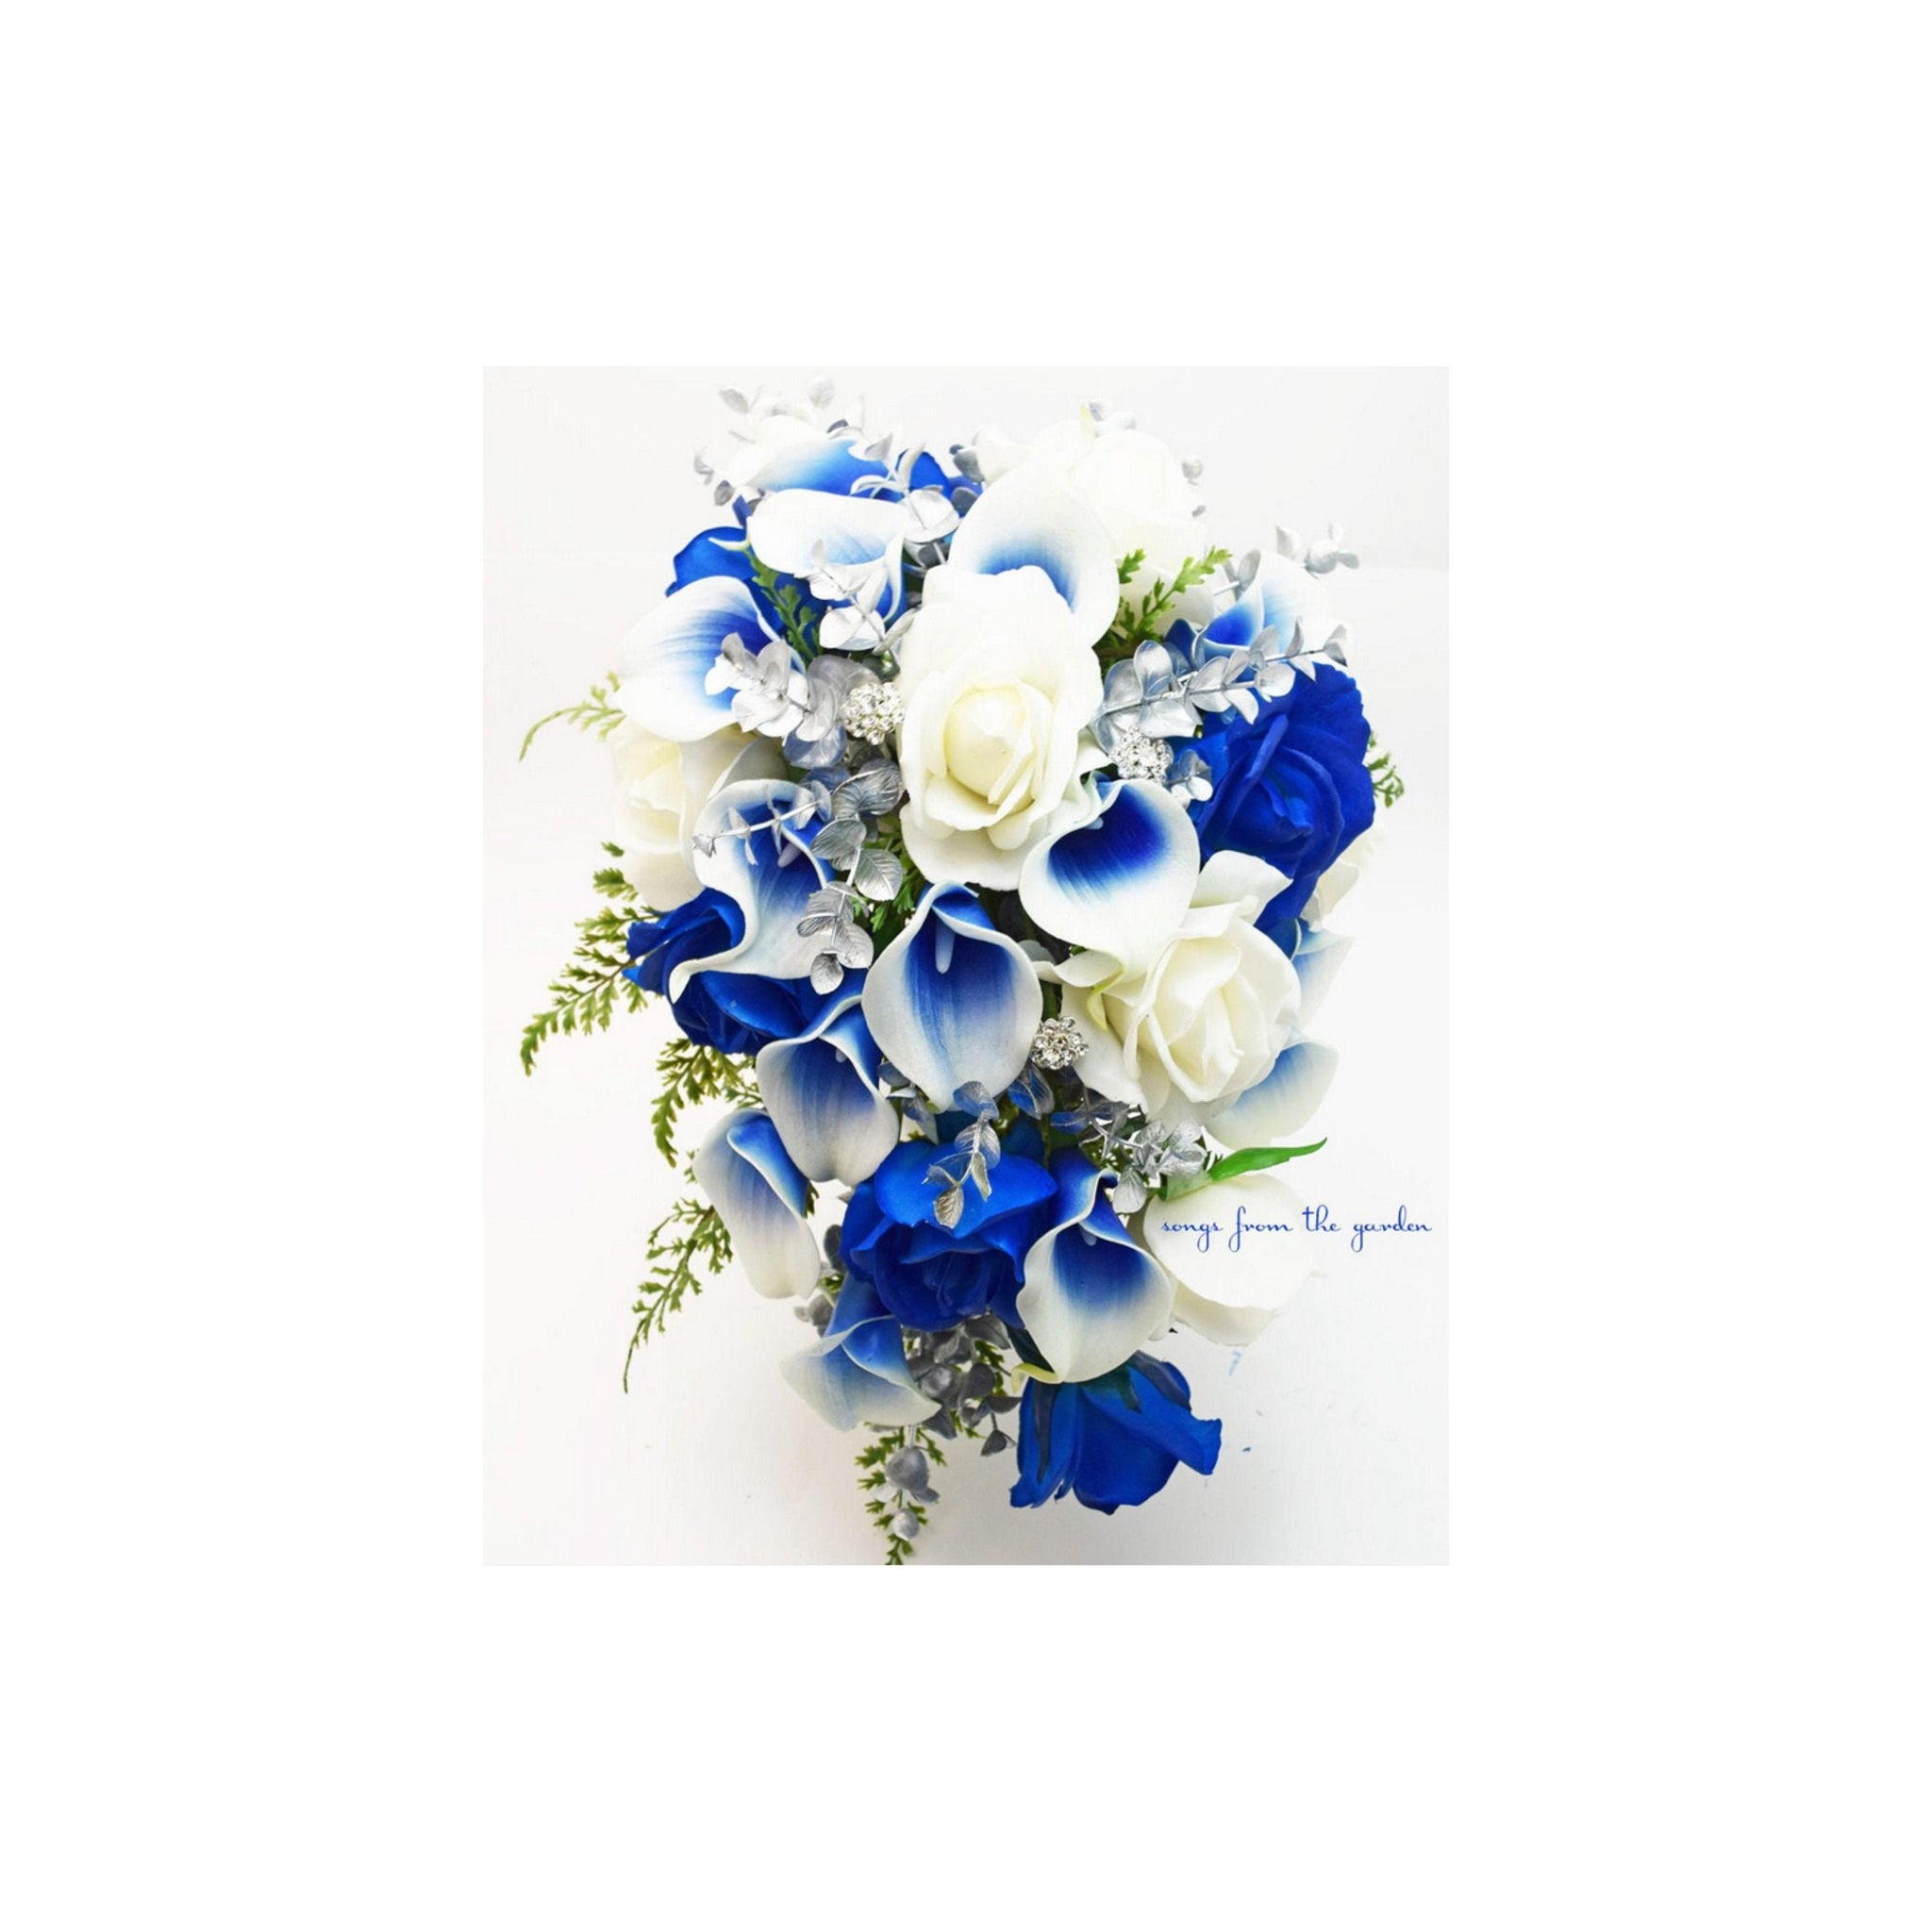 Cascade Bridal Bouquet Silver Blue White - Picasso Callas Real Touch Royal Blue Roses, Rhinestones - Add Groom's Boutonniere Bridesmaid